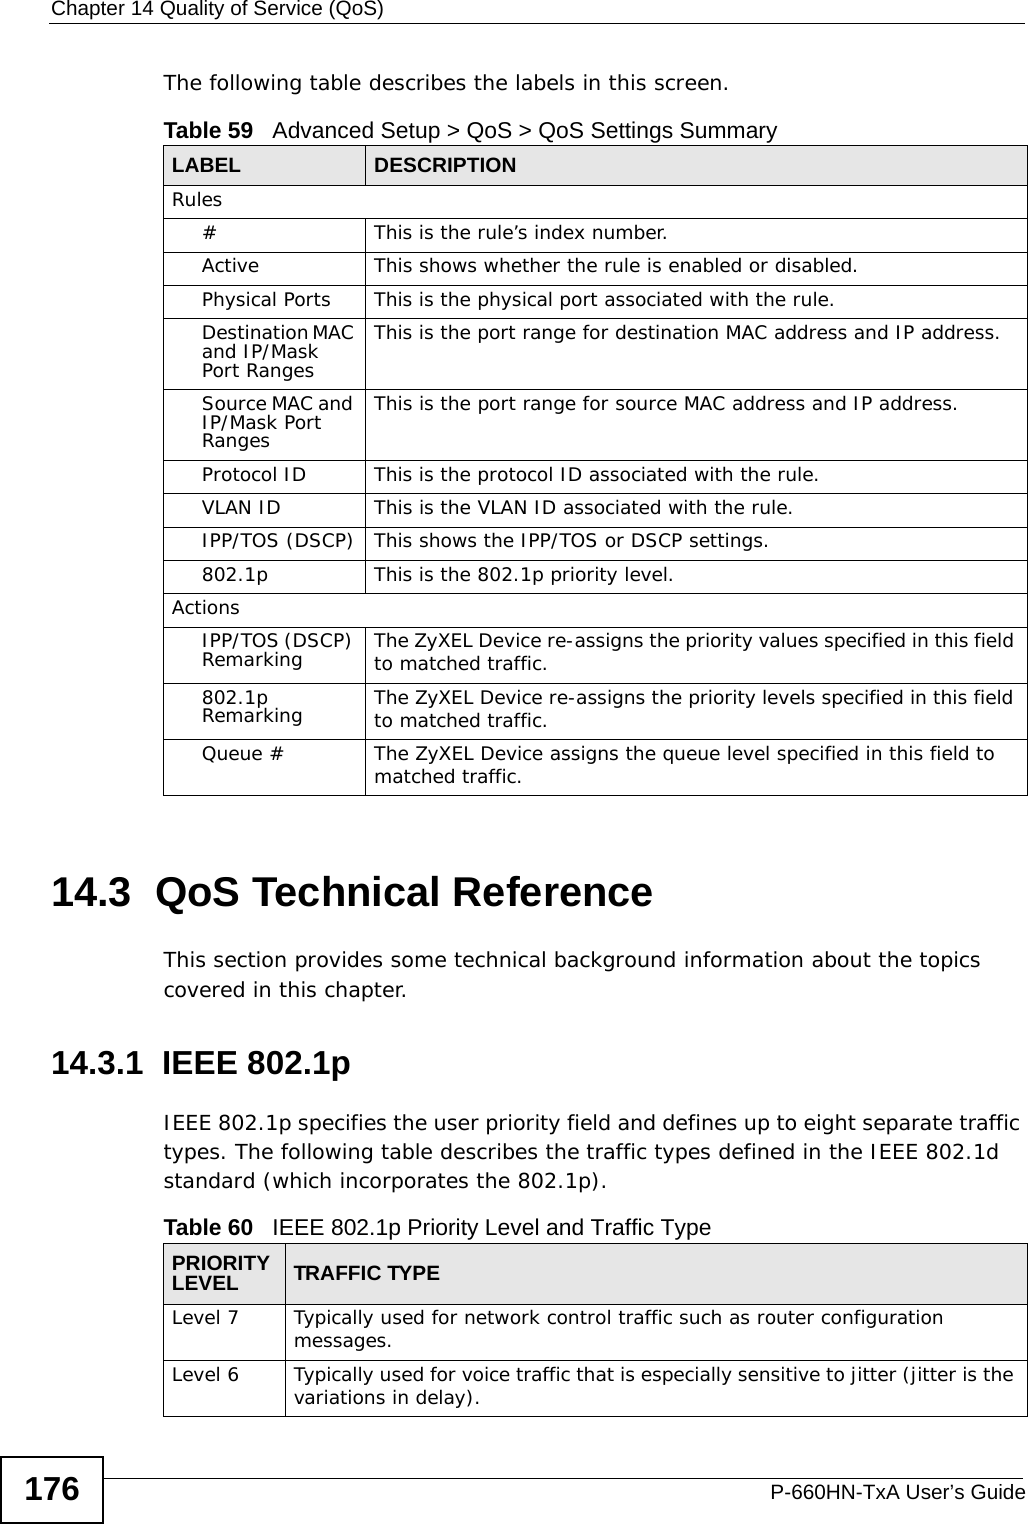 Chapter 14 Quality of Service (QoS)P-660HN-TxA User’s Guide176The following table describes the labels in this screen.  14.3  QoS Technical ReferenceThis section provides some technical background information about the topics covered in this chapter.14.3.1  IEEE 802.1pIEEE 802.1p specifies the user priority field and defines up to eight separate traffic types. The following table describes the traffic types defined in the IEEE 802.1d standard (which incorporates the 802.1p). Table 59   Advanced Setup &gt; QoS &gt; QoS Settings SummaryLABEL DESCRIPTIONRules#This is the rule’s index number.Active This shows whether the rule is enabled or disabled.Physical Ports This is the physical port associated with the rule.Destination MAC and IP/Mask Port RangesThis is the port range for destination MAC address and IP address.Source MAC and IP/Mask Port RangesThis is the port range for source MAC address and IP address.Protocol ID This is the protocol ID associated with the rule.VLAN ID This is the VLAN ID associated with the rule.IPP/TOS (DSCP) This shows the IPP/TOS or DSCP settings.802.1p This is the 802.1p priority level.ActionsIPP/TOS (DSCP) Remarking The ZyXEL Device re-assigns the priority values specified in this field to matched traffic.802.1p Remarking The ZyXEL Device re-assigns the priority levels specified in this field to matched traffic.Queue # The ZyXEL Device assigns the queue level specified in this field to matched traffic.Table 60   IEEE 802.1p Priority Level and Traffic TypePRIORITY LEVEL TRAFFIC TYPELevel 7 Typically used for network control traffic such as router configuration messages.Level 6 Typically used for voice traffic that is especially sensitive to jitter (jitter is the variations in delay).